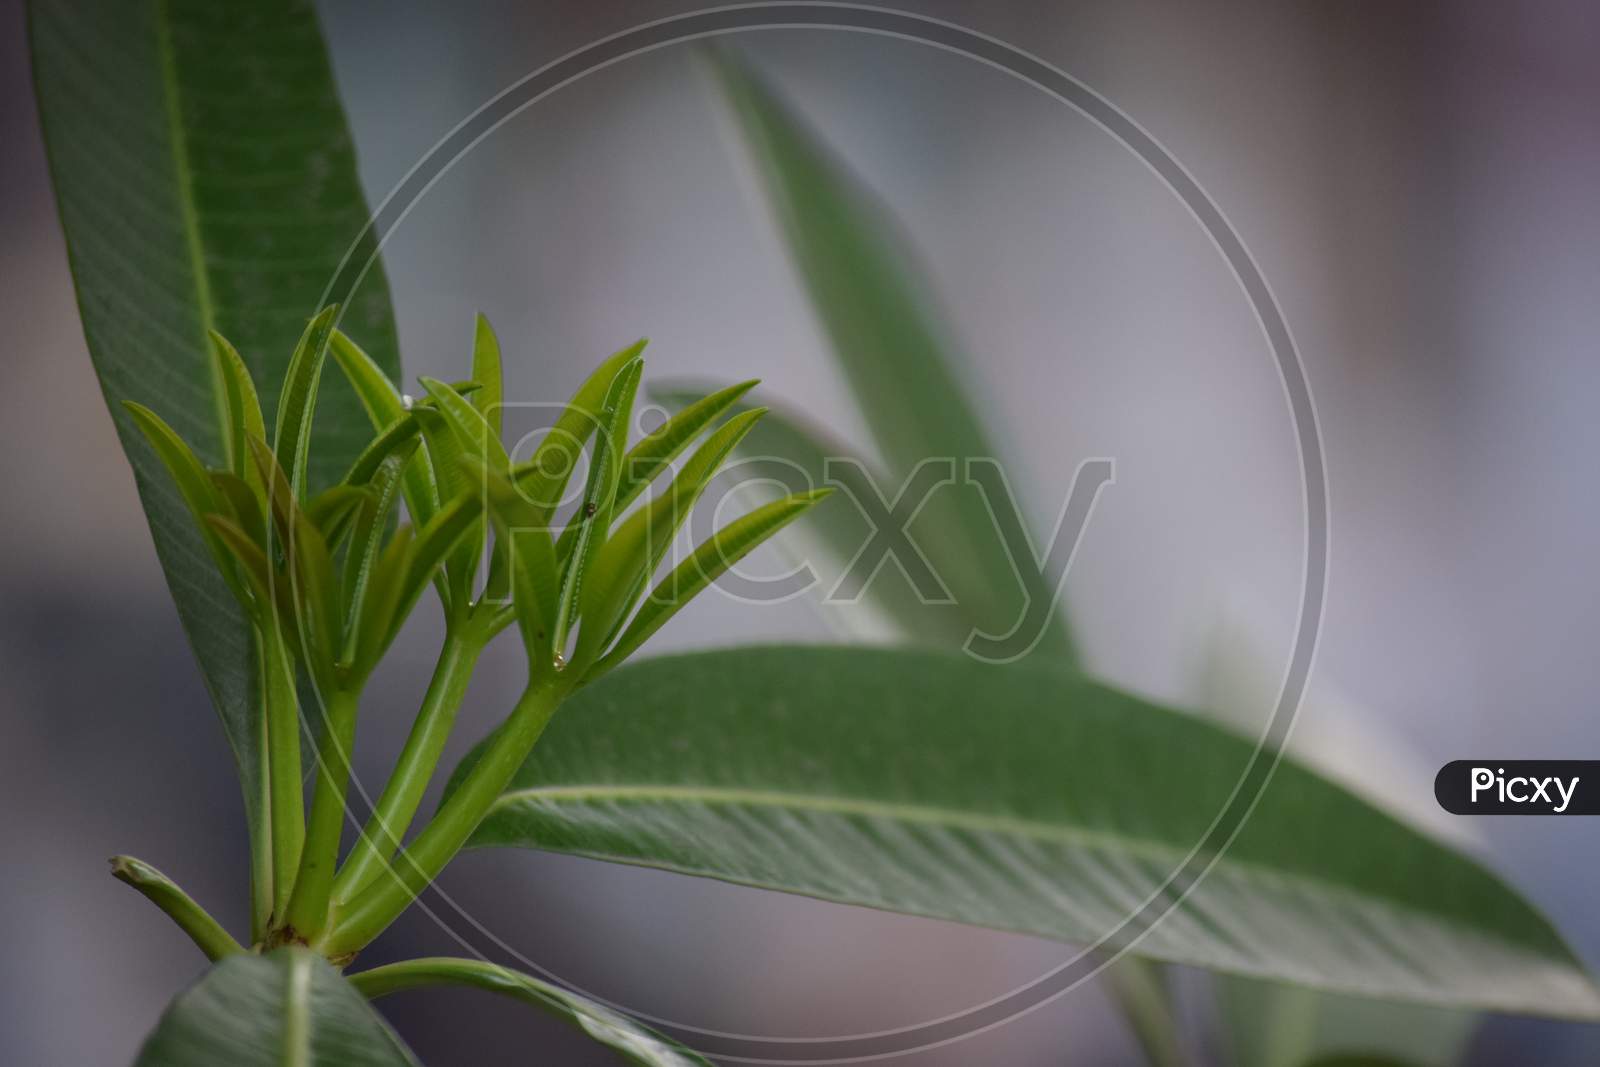 Green Plant With Leaves On Blurred Background